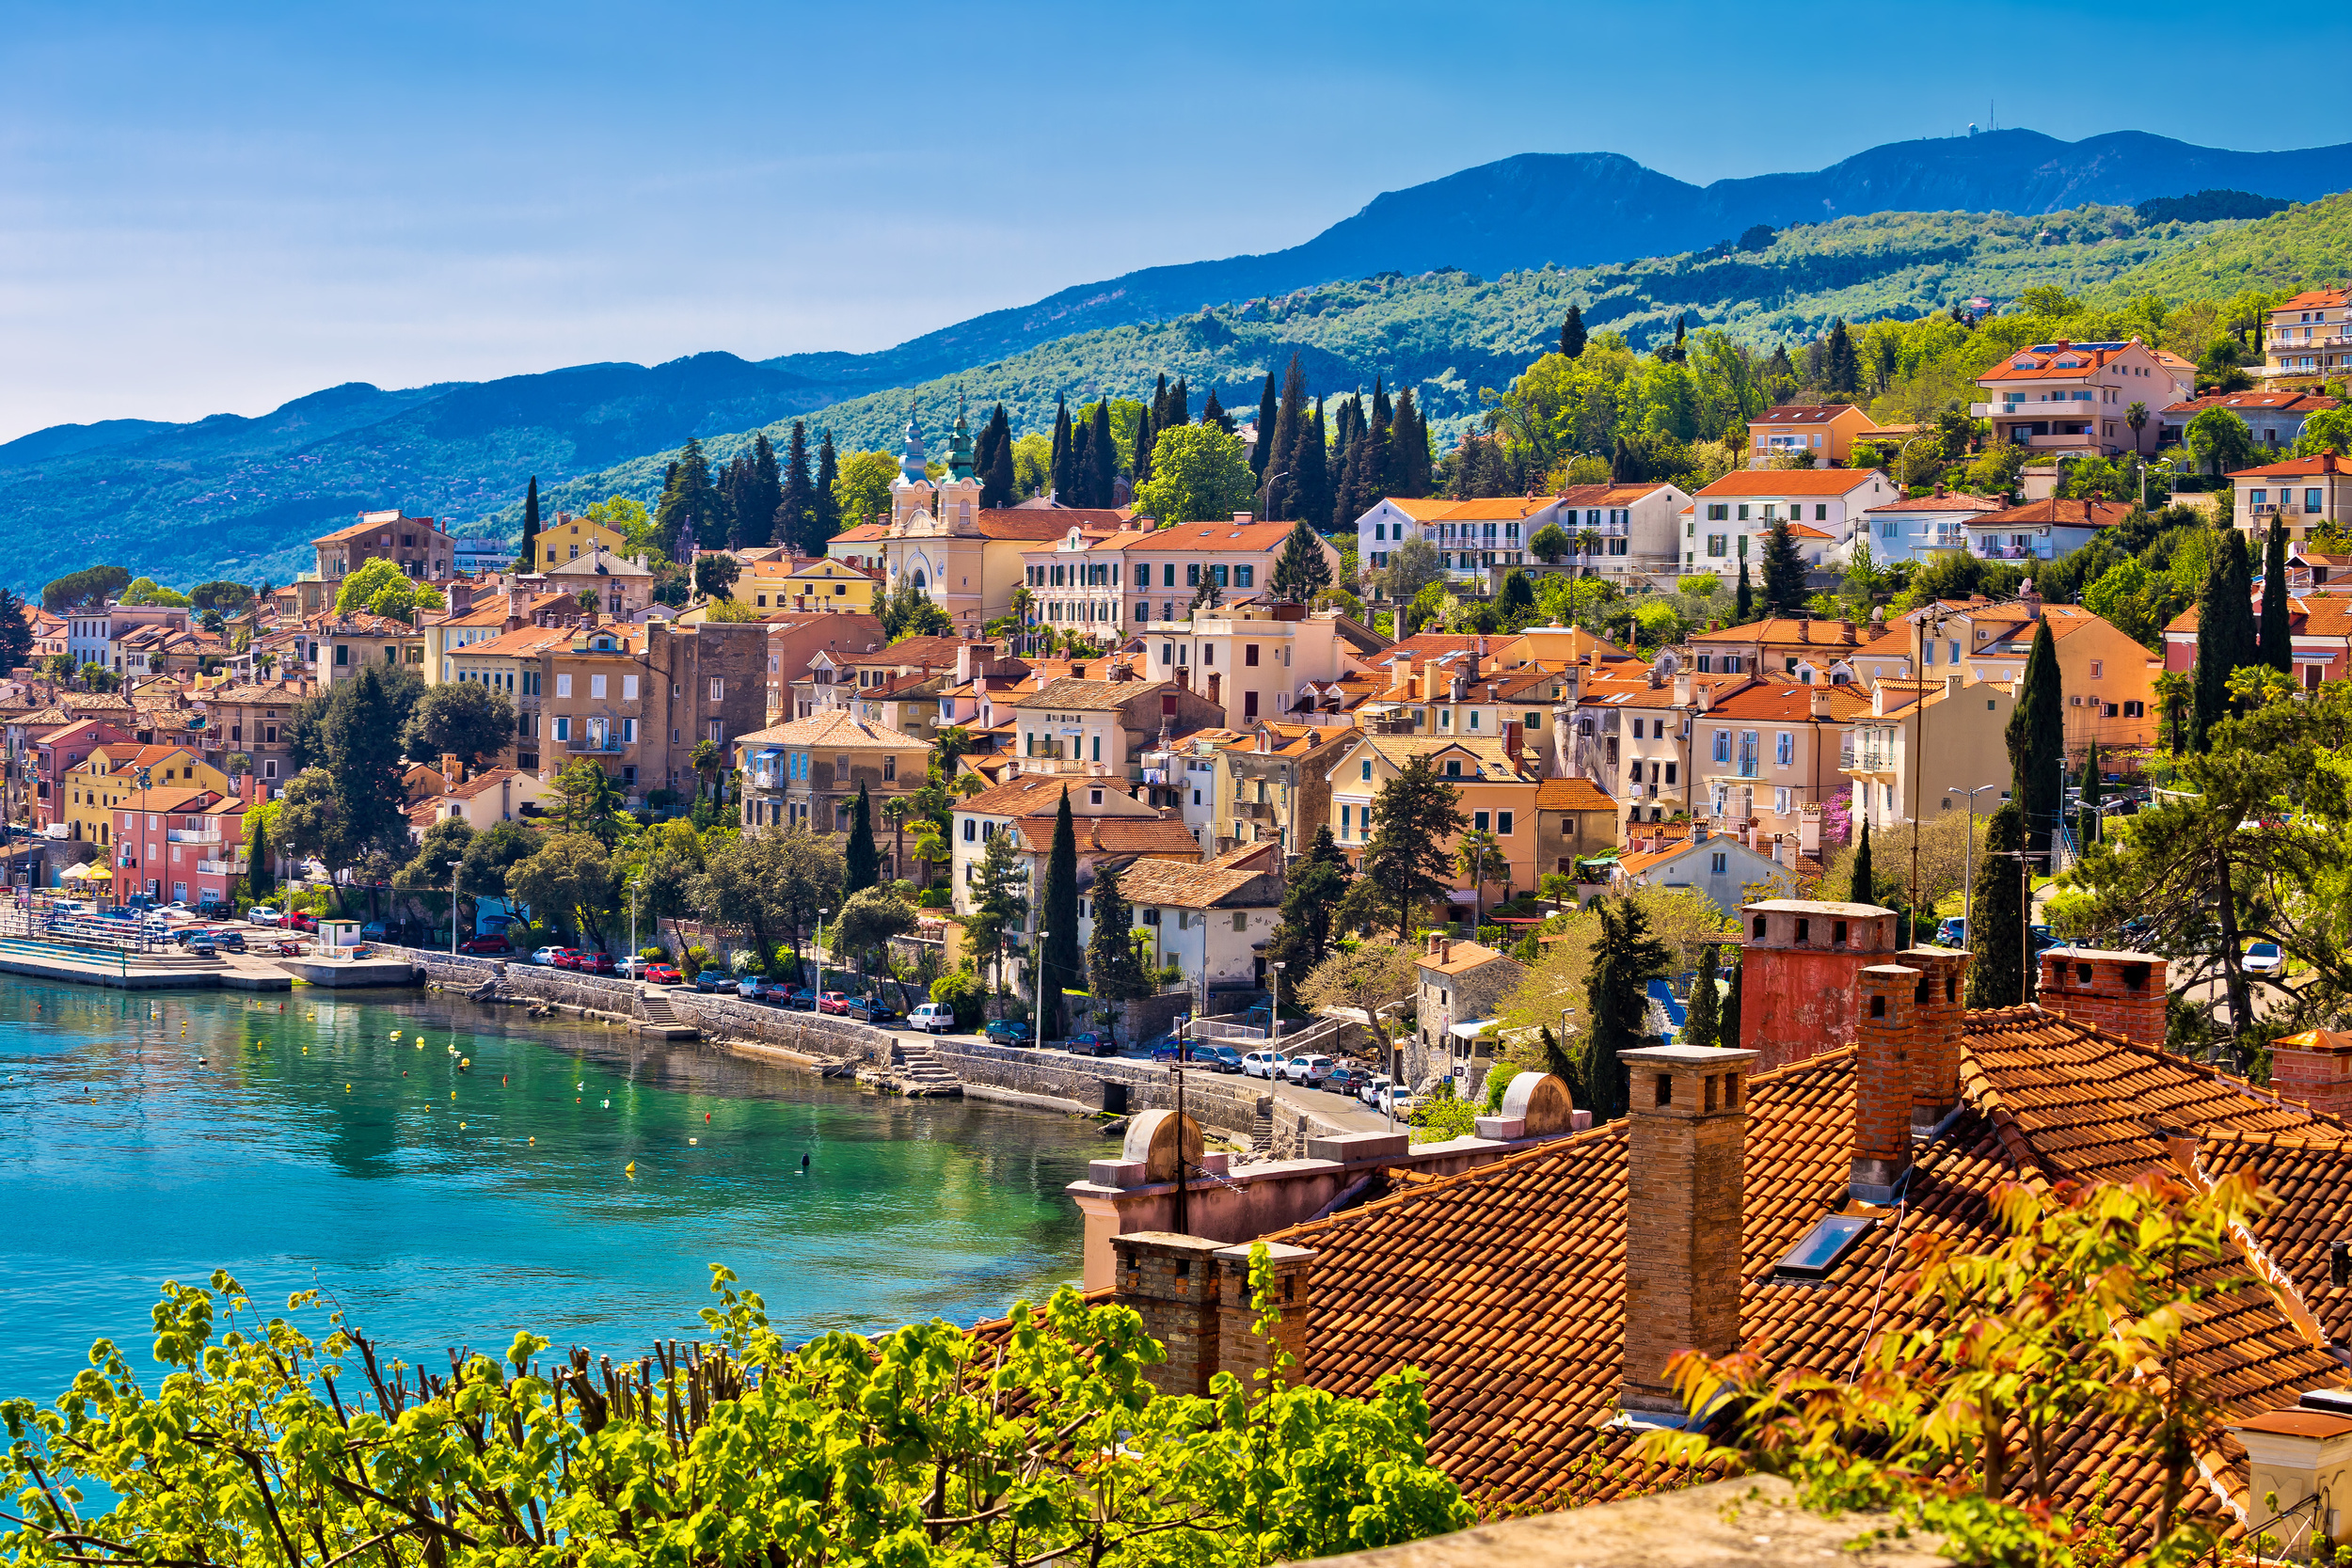 <p>Most popular among Austrian retirees, Opatija is absolutely worth a stop for wonderful food and views. It’s also home to a number of mansions from the Habsburg period — an interesting contrast to much of the coast. And, if you visit outside of peak season, you’ll likely have it all to yourself. </p><p>You may also like: <a href='https://www.yardbarker.com/lifestyle/articles/recipes_that_prove_oatmeal_doesnt_have_to_be_boring/s1__22227079'>Recipes that prove oatmeal doesn't have to be boring</a></p>